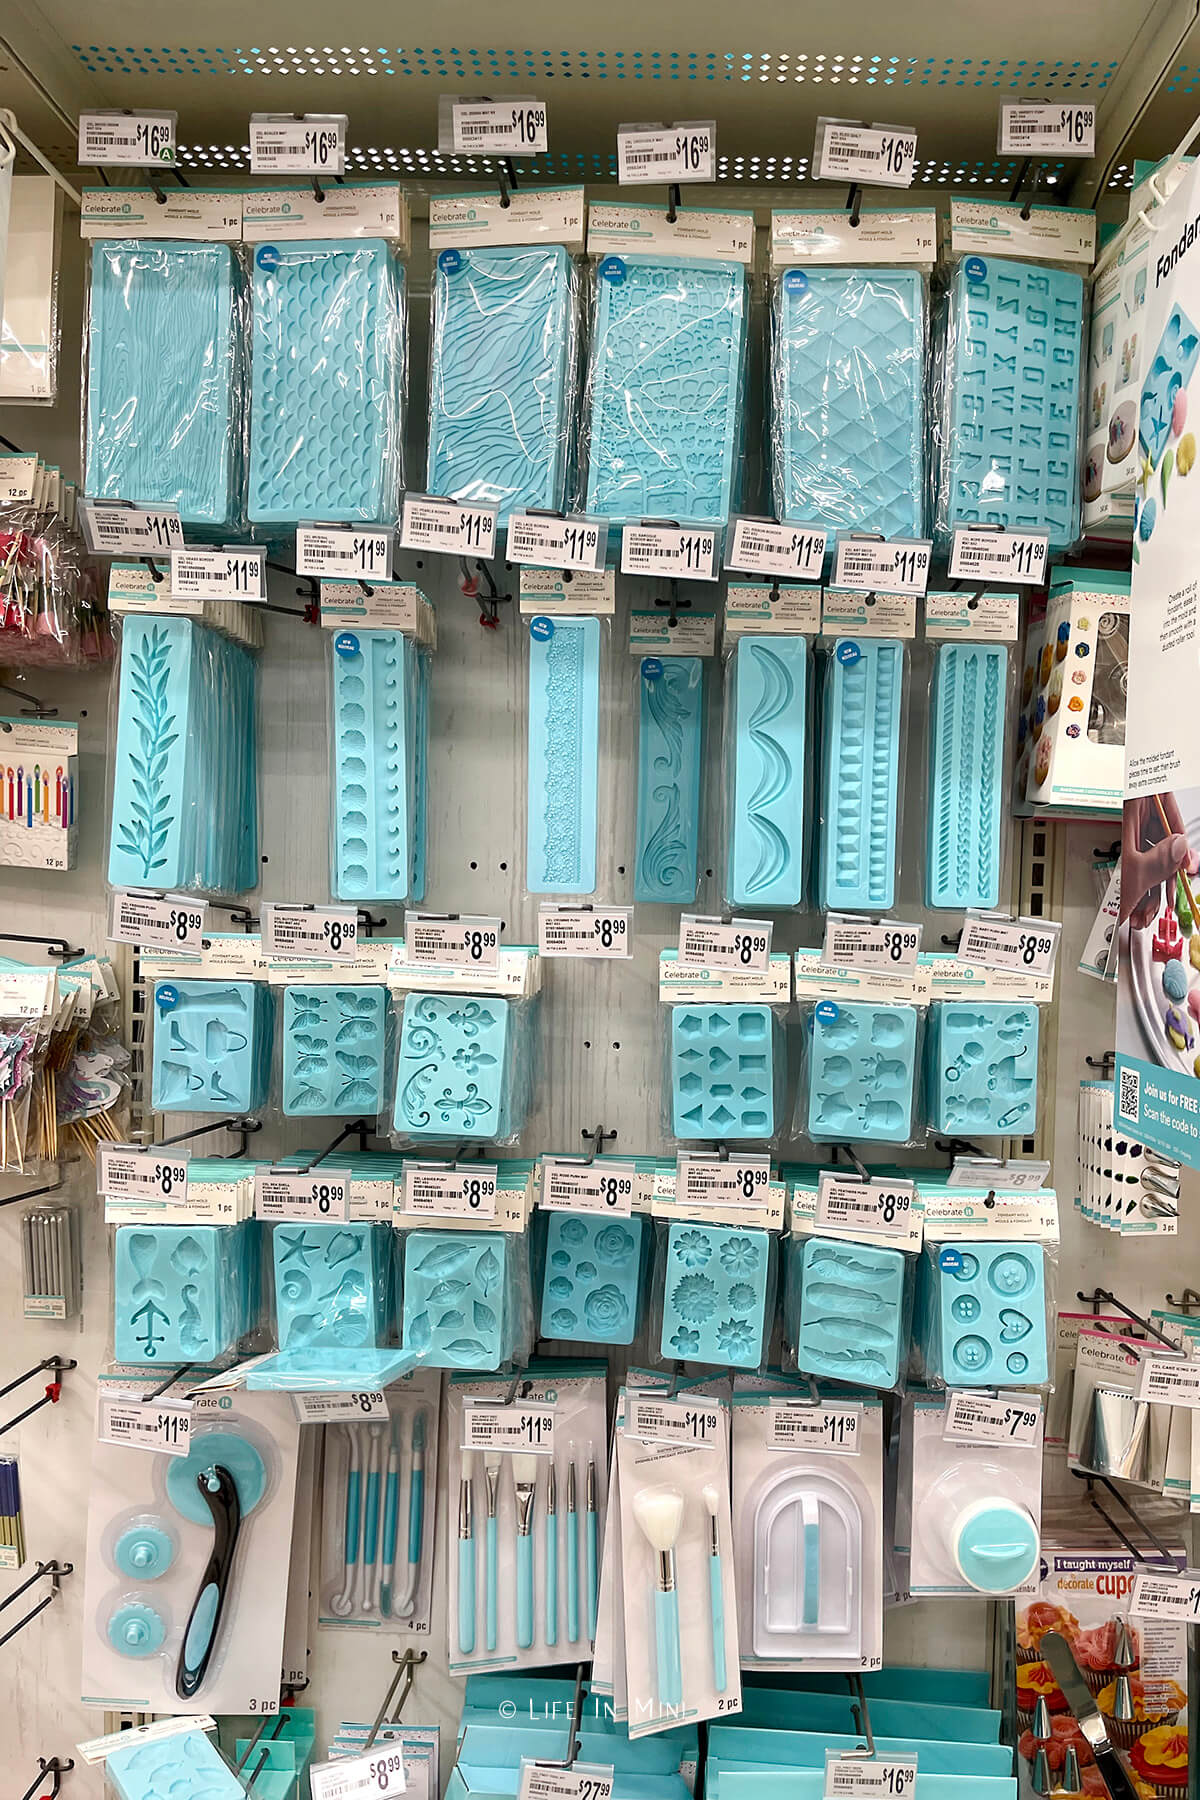 Fondant molds found in Michaels craft store